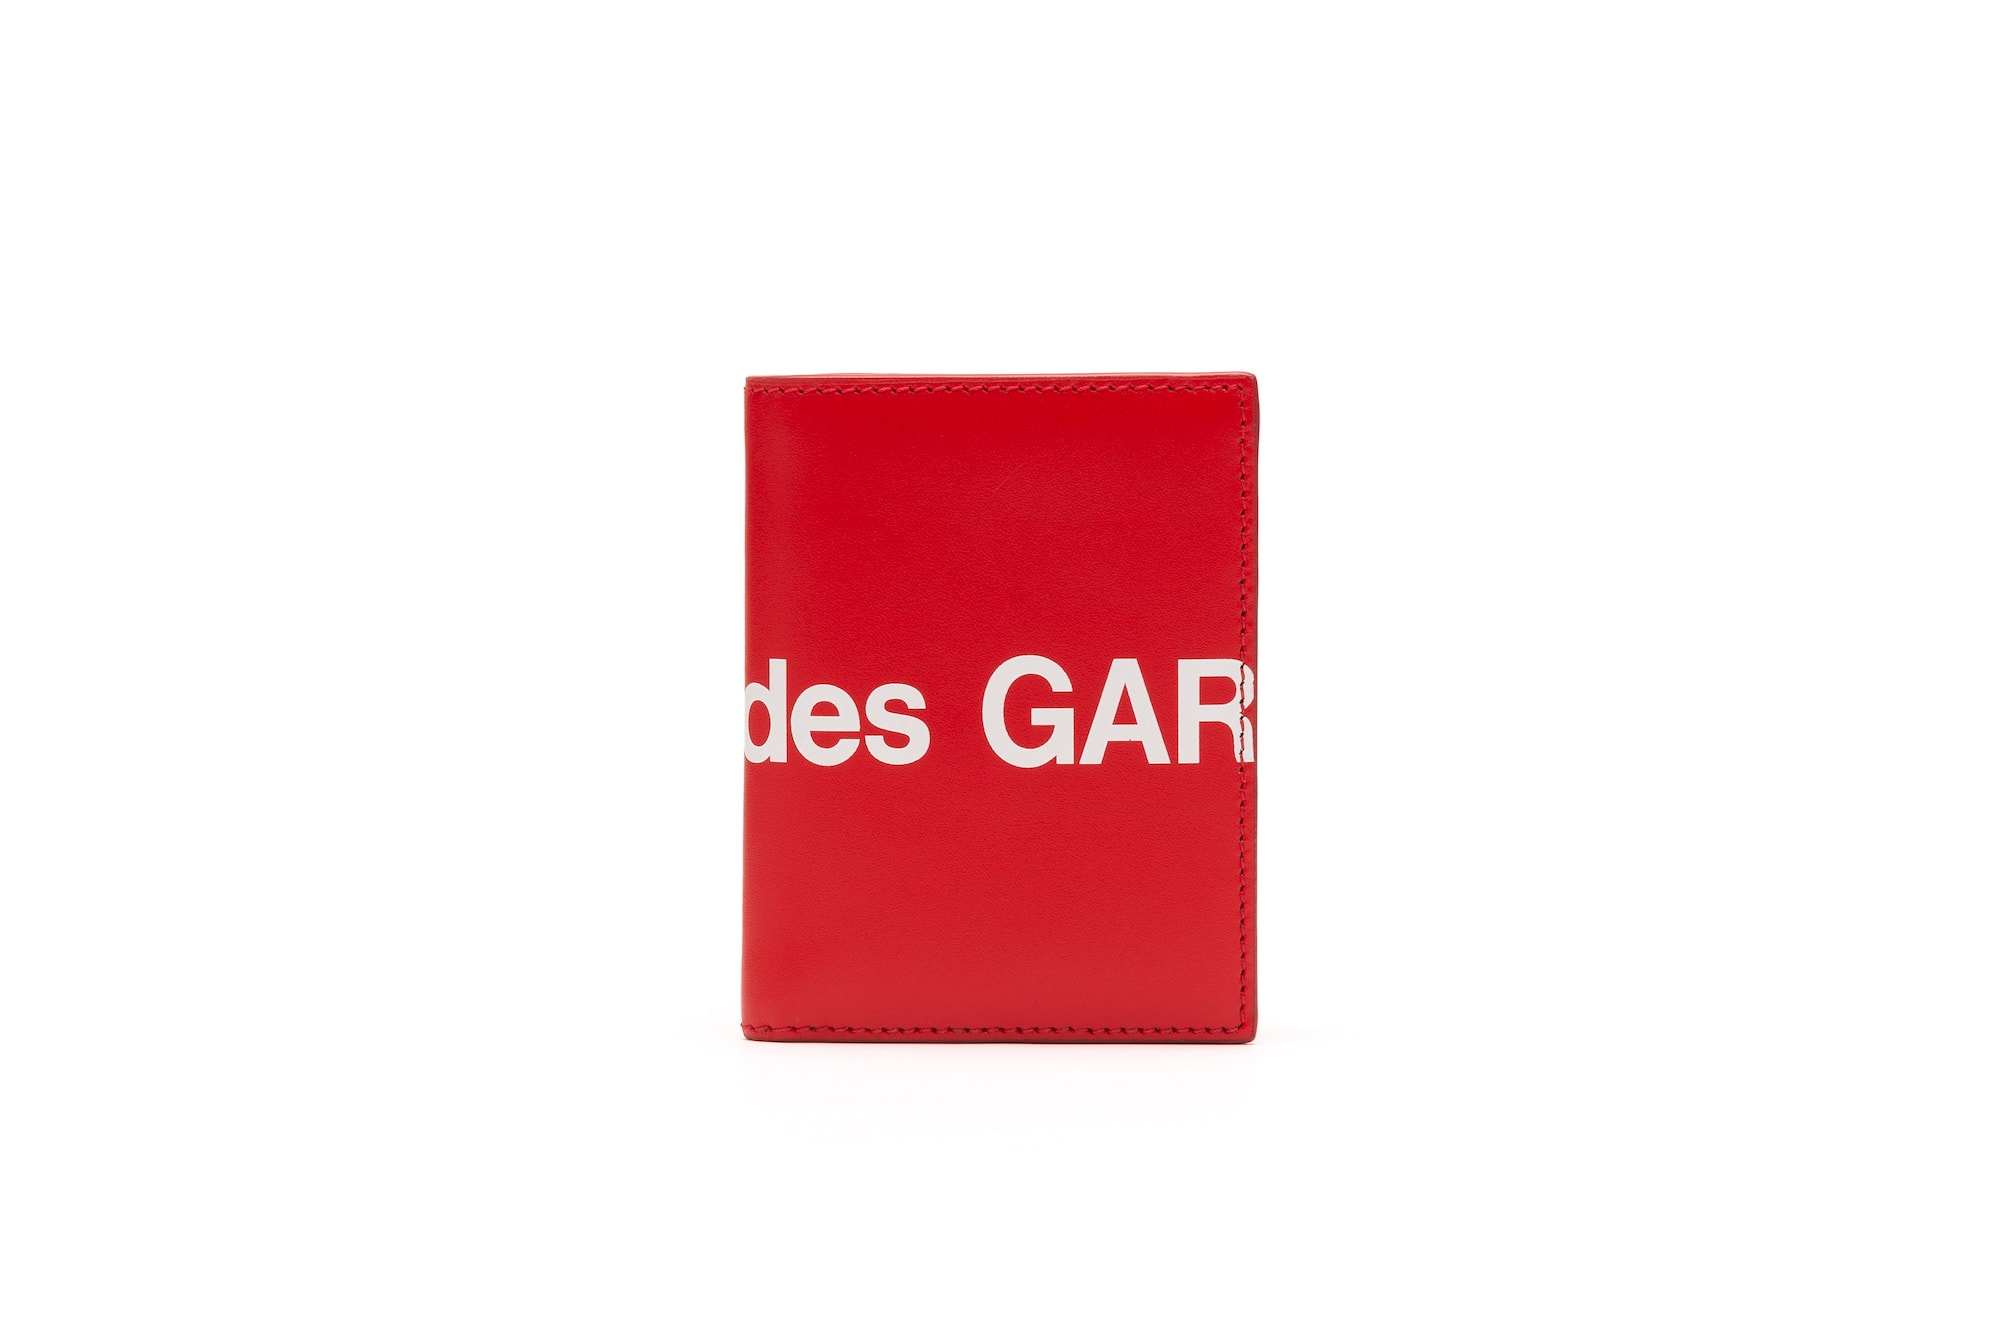 COMME des GARÇONS Red and Black Logo Wallets White Big Print Coin Pouch